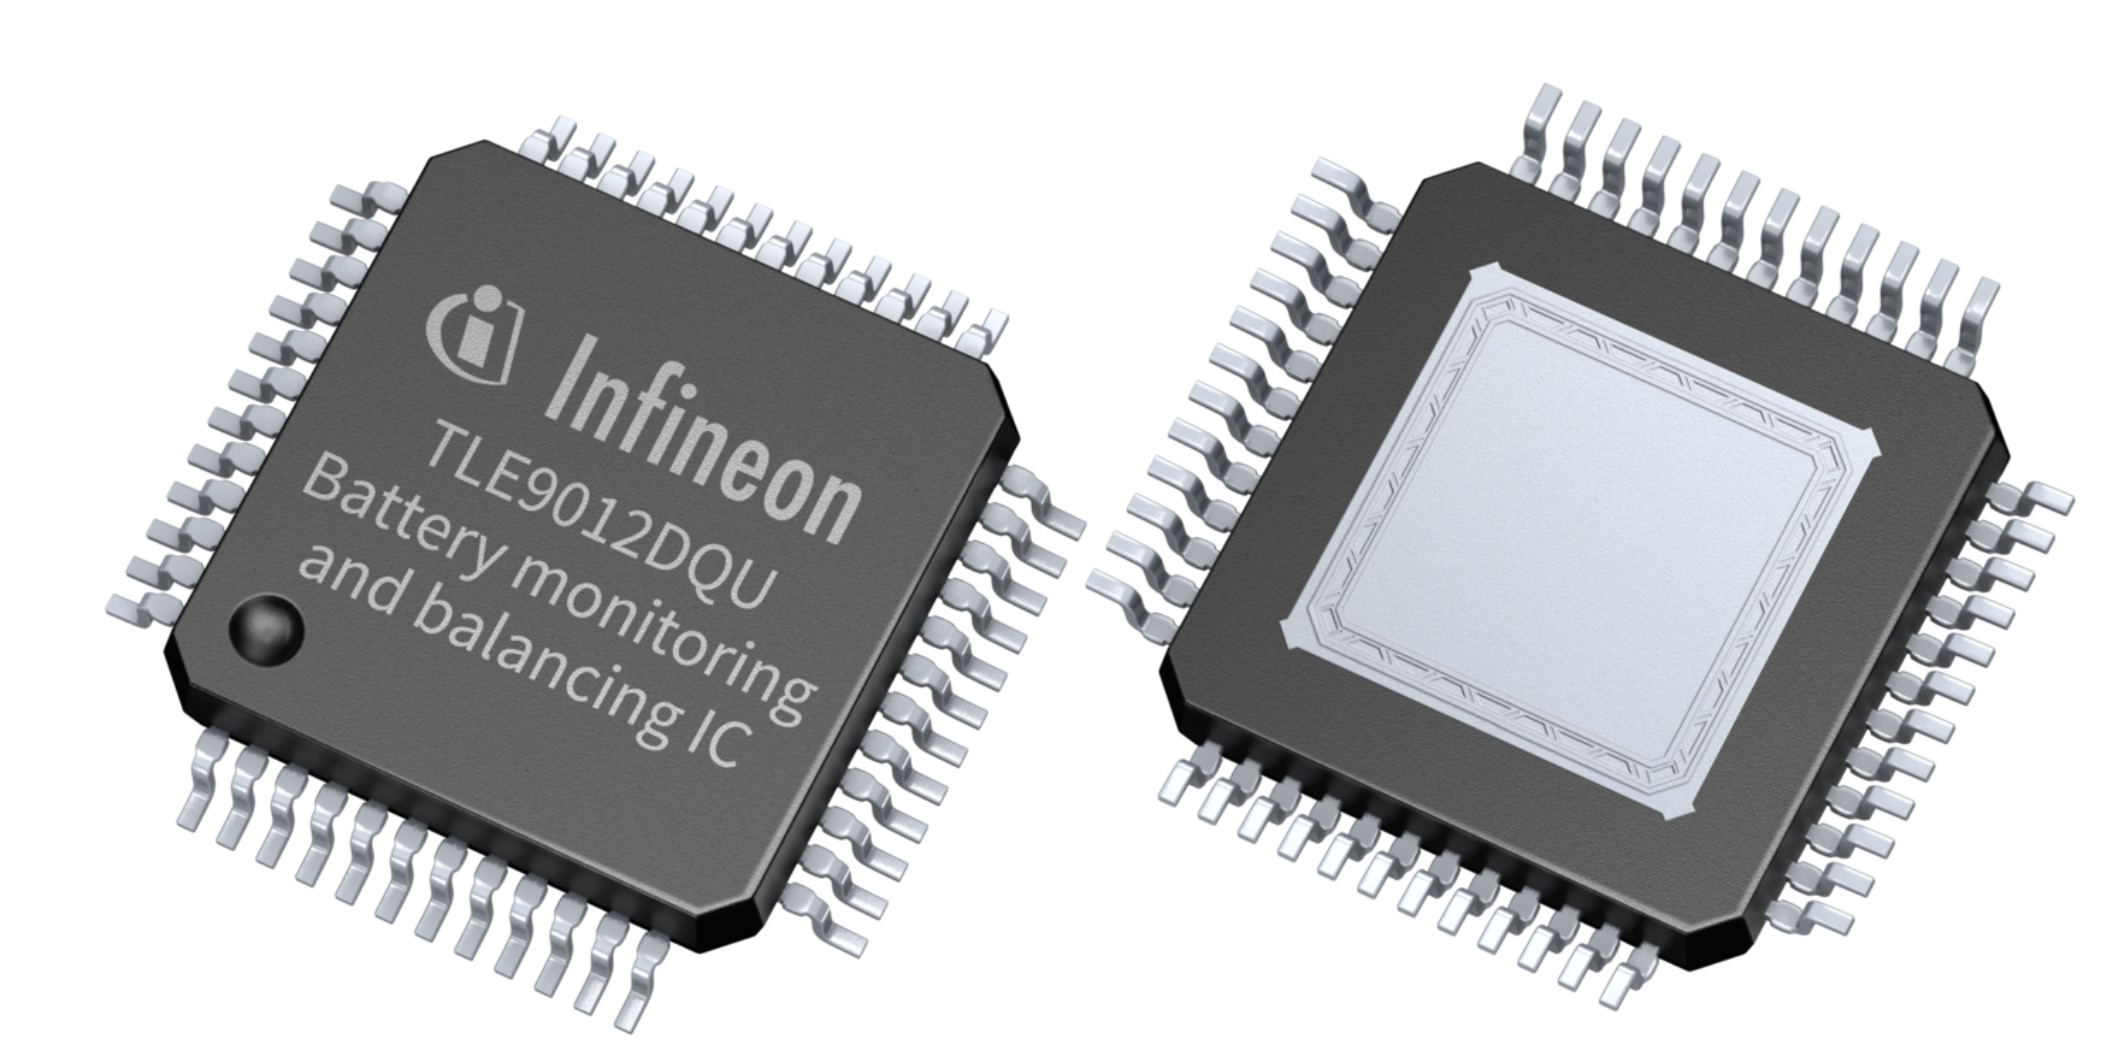 Chinese Car Company NETA First to use Infineon's New-Generation BMS Solution